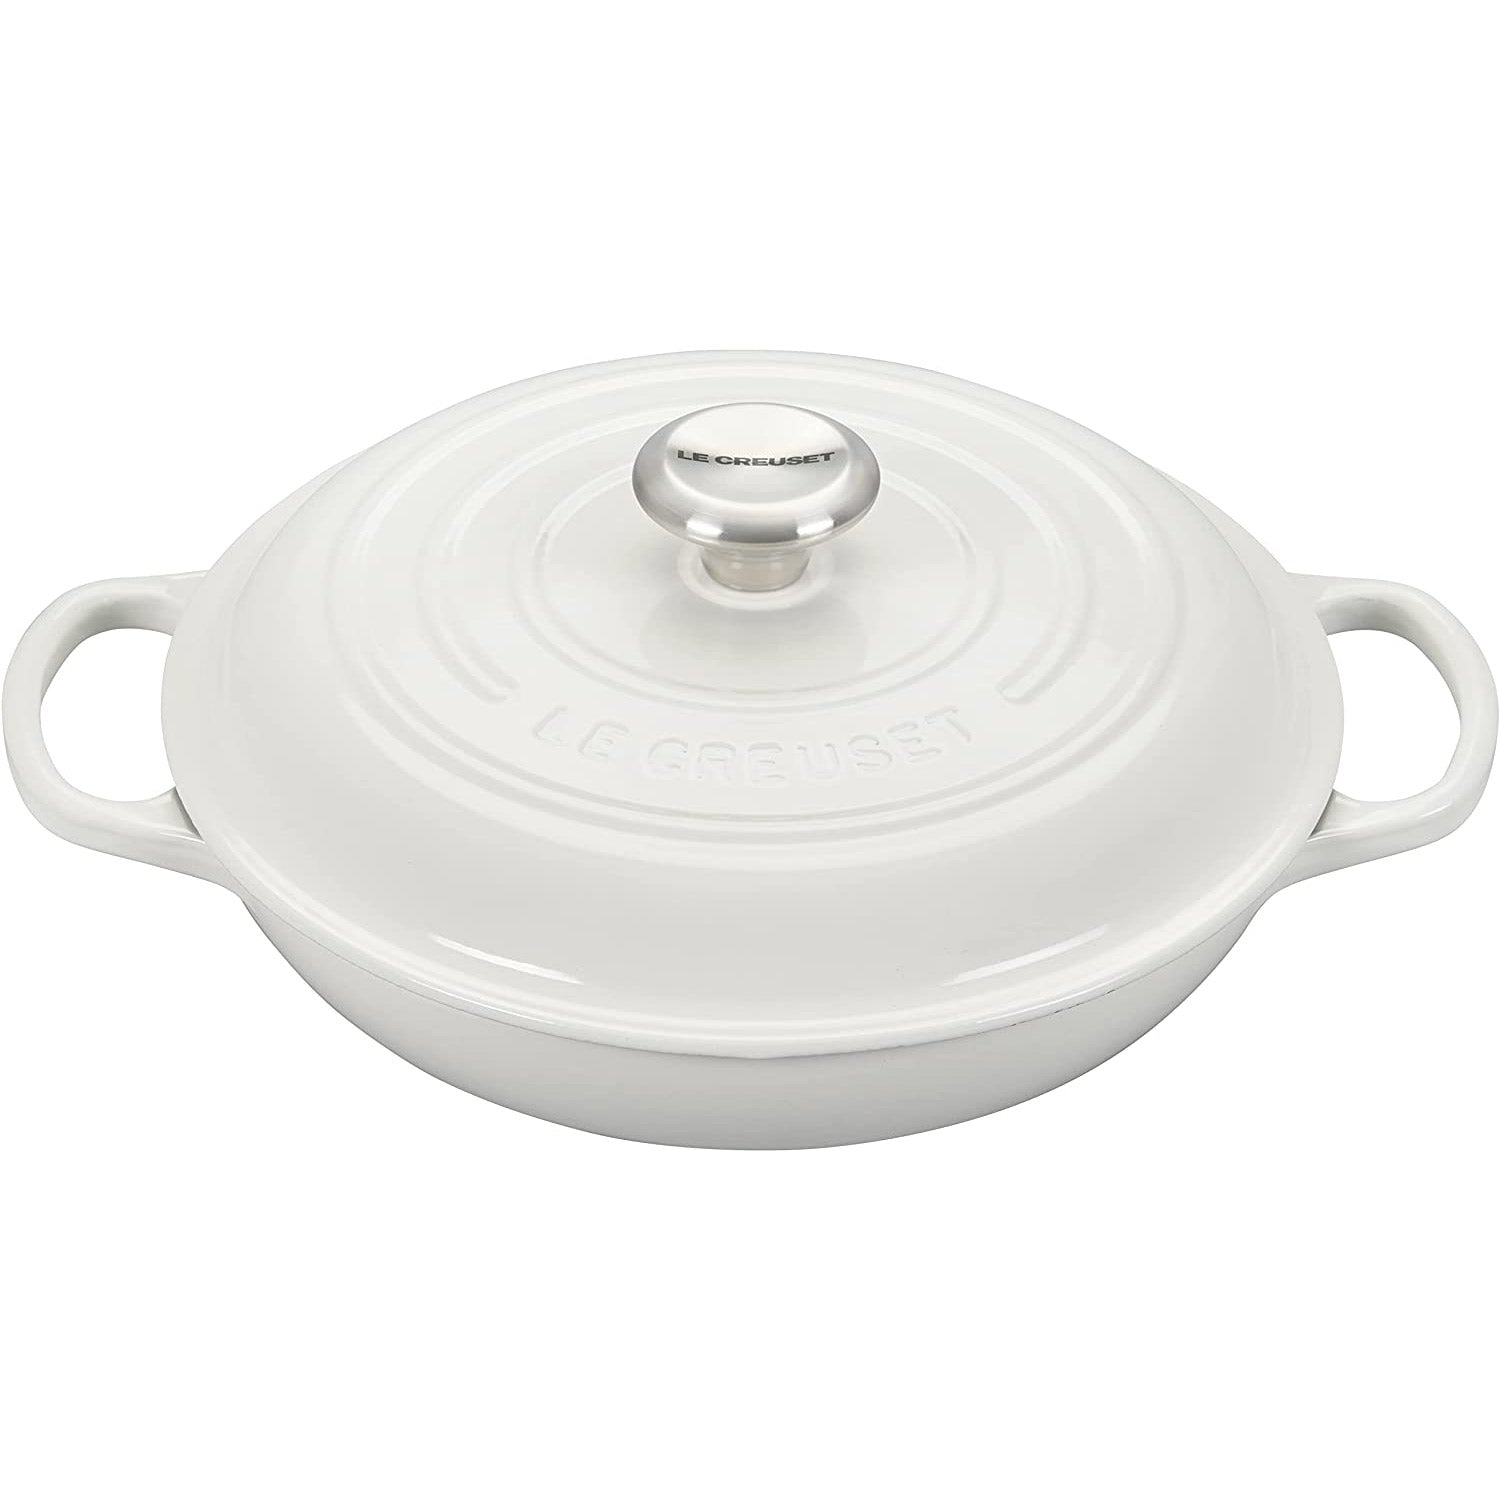 Le Creuset 10-Pc Cookware Set in White